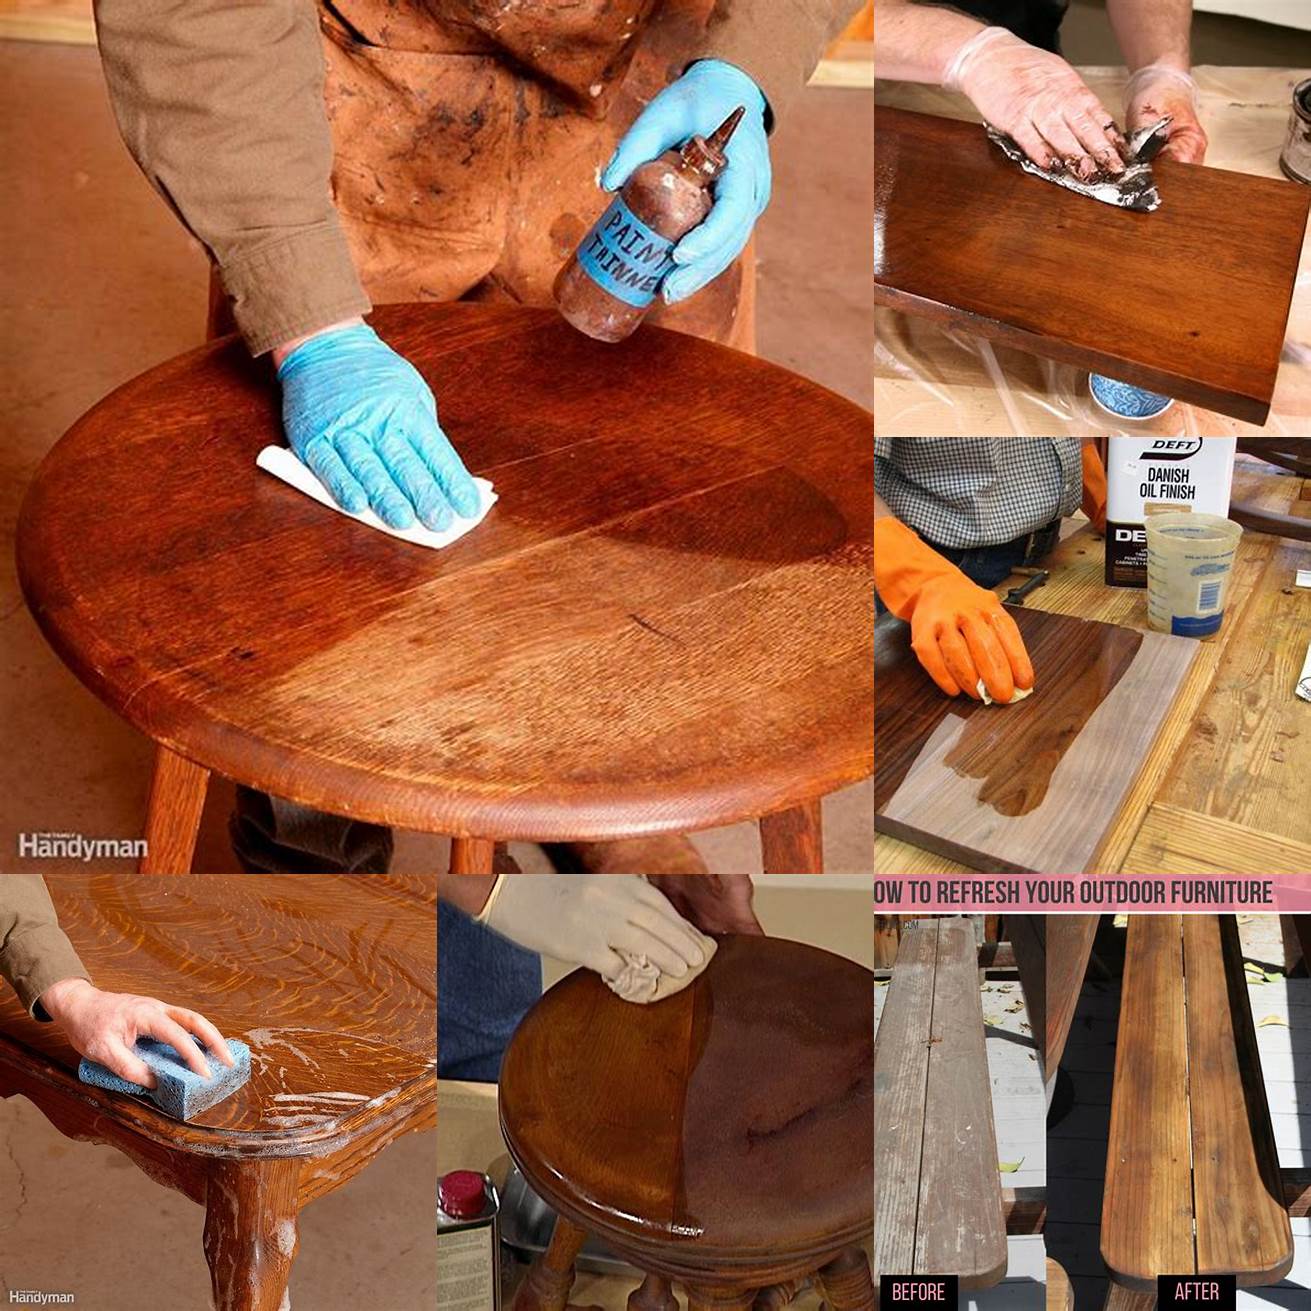 Re-oiling the furniture